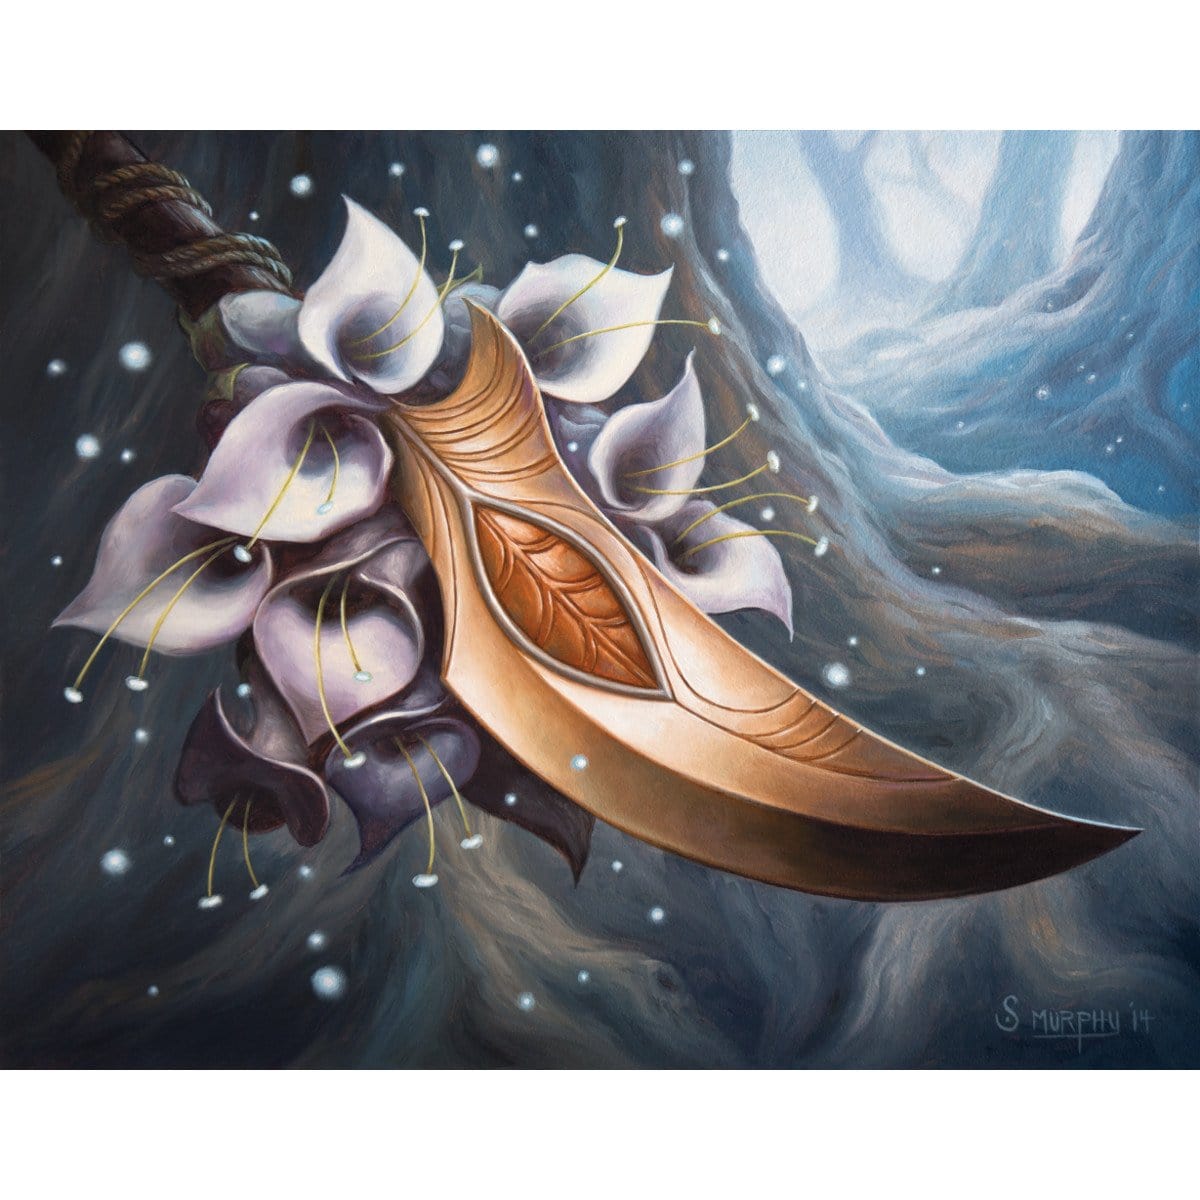 Touch of Moonglove Print - Print - Original Magic Art - Accessories for Magic the Gathering and other card games